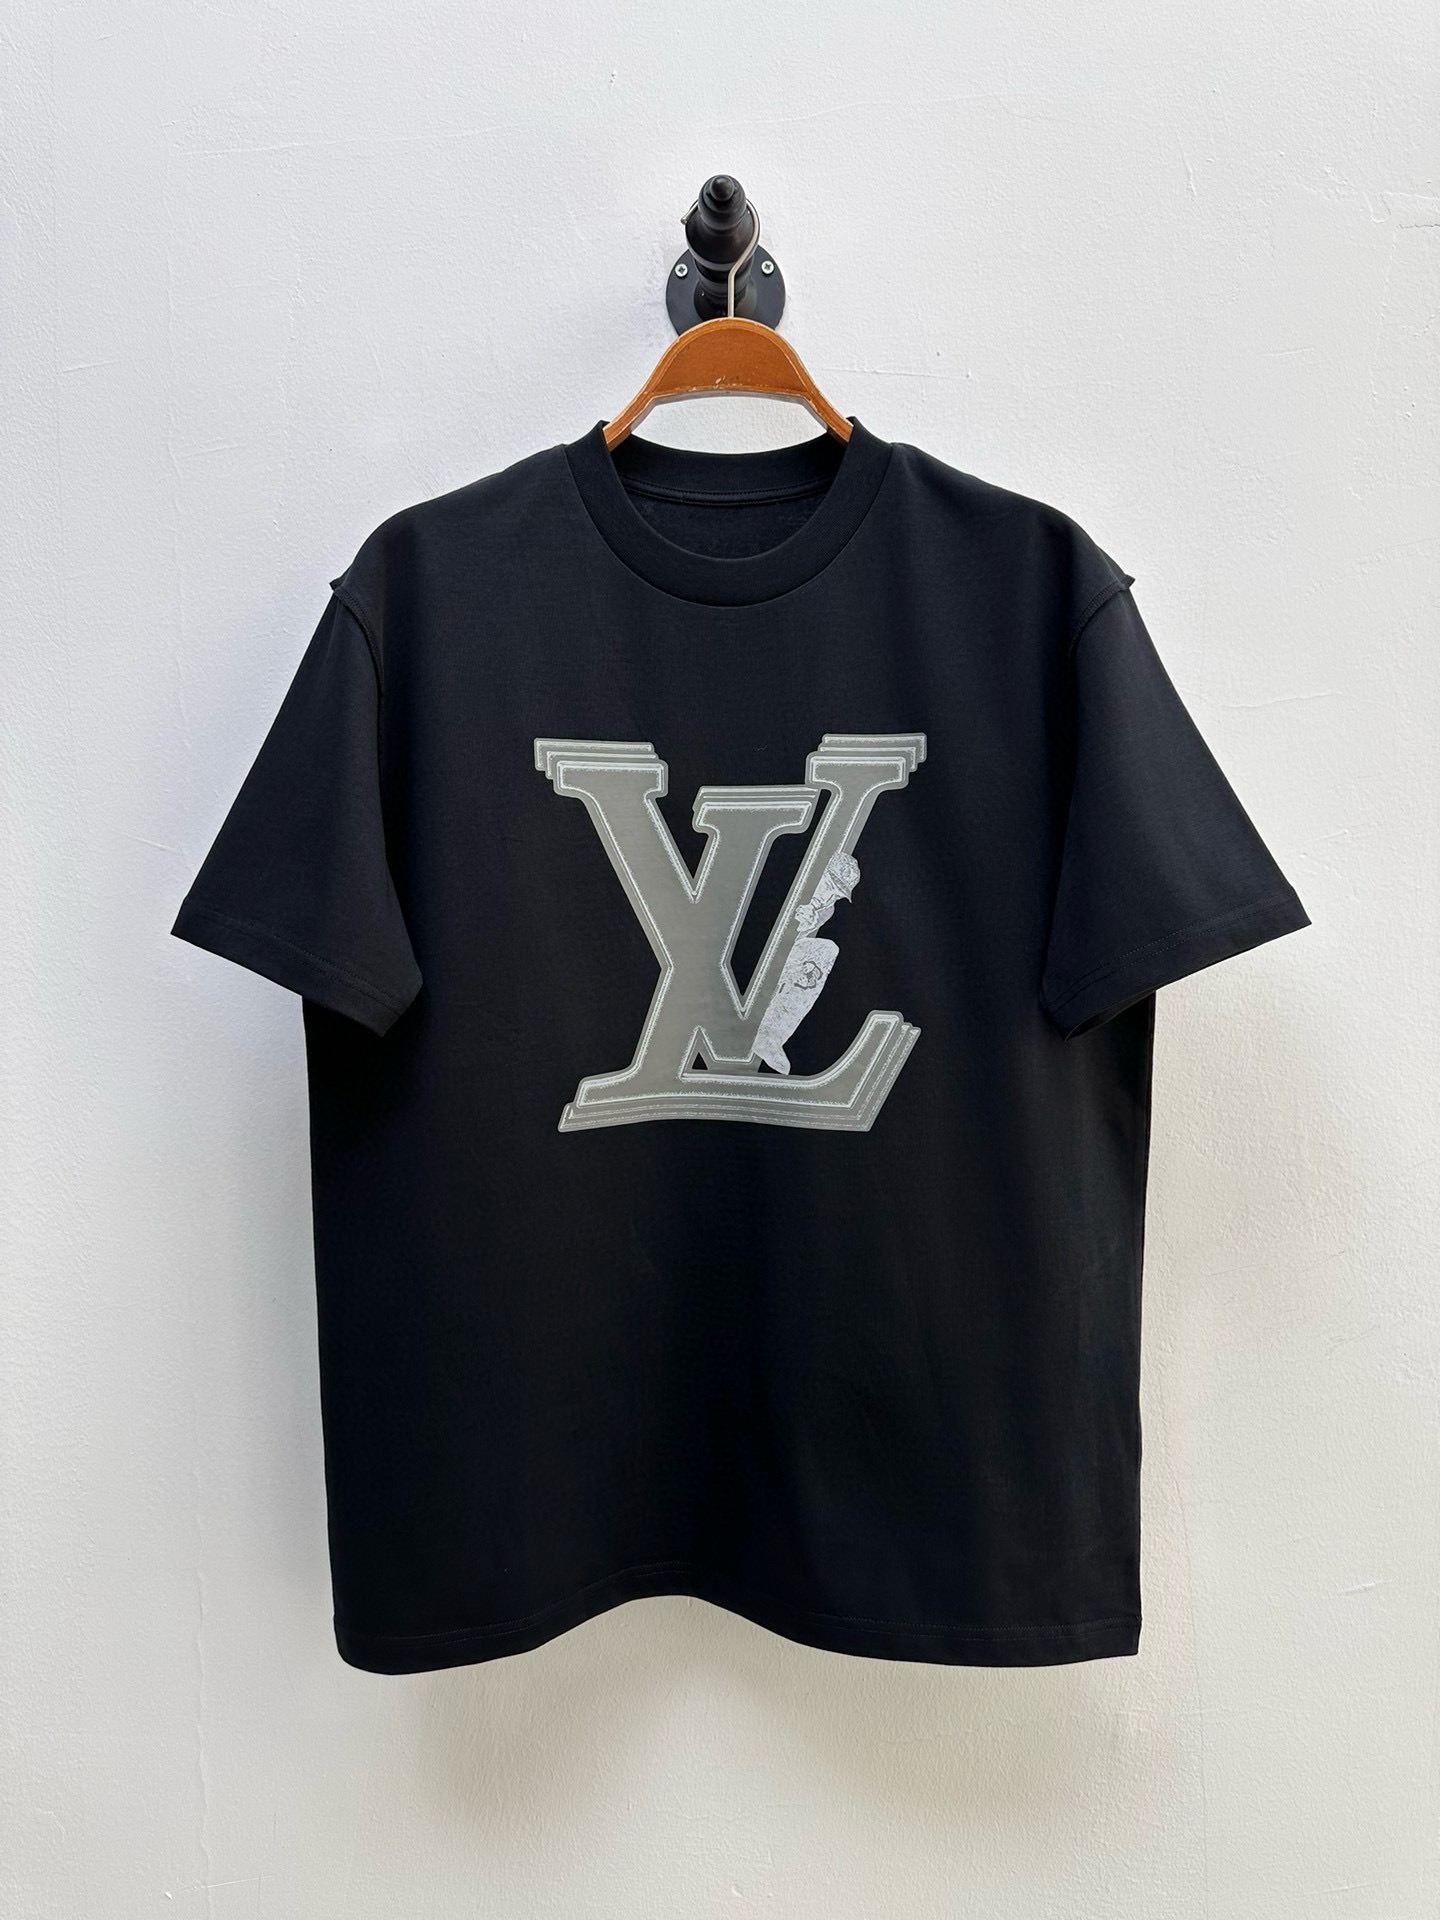 Louis Vuitton Clothing T-Shirt Black White Cotton Fabric Knitted Knitting Vintage